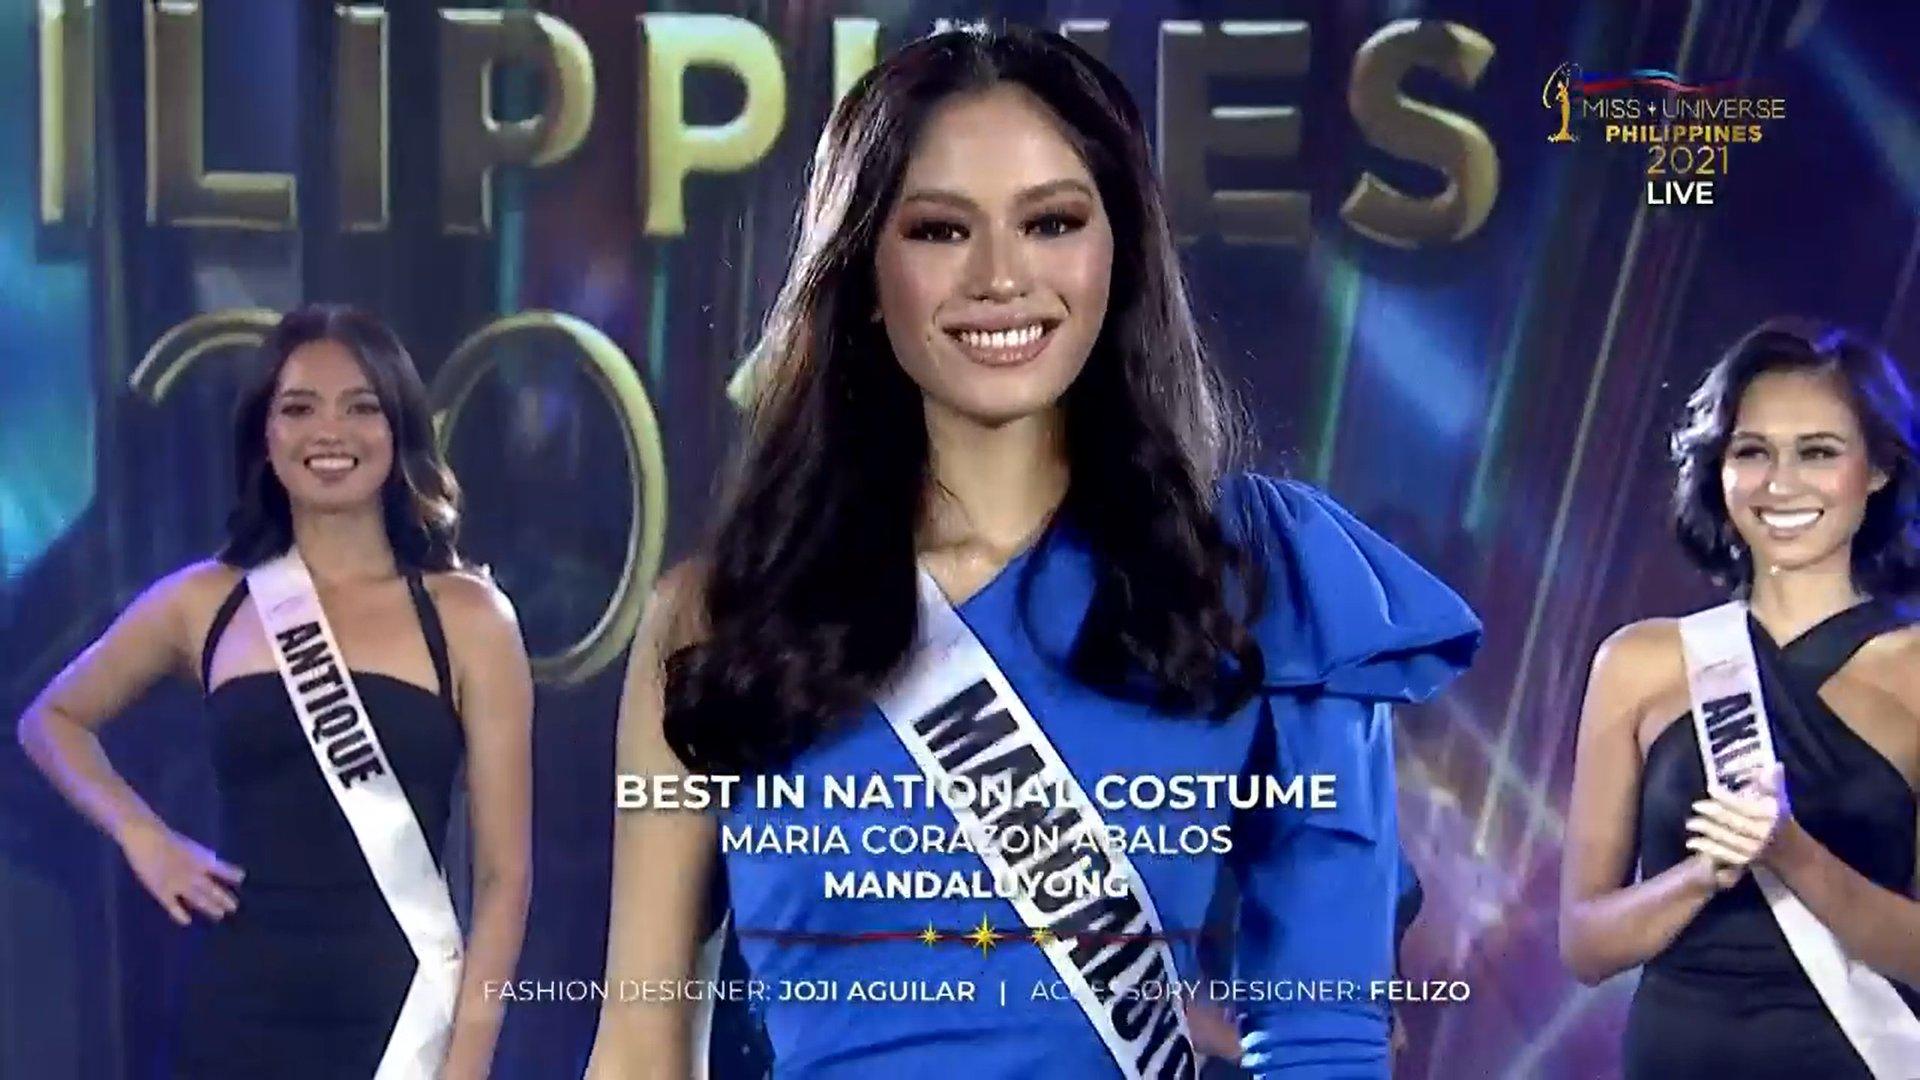 Miss universe philippines mandaluyong bet maria corazon abalos wins best in national costume gma news online